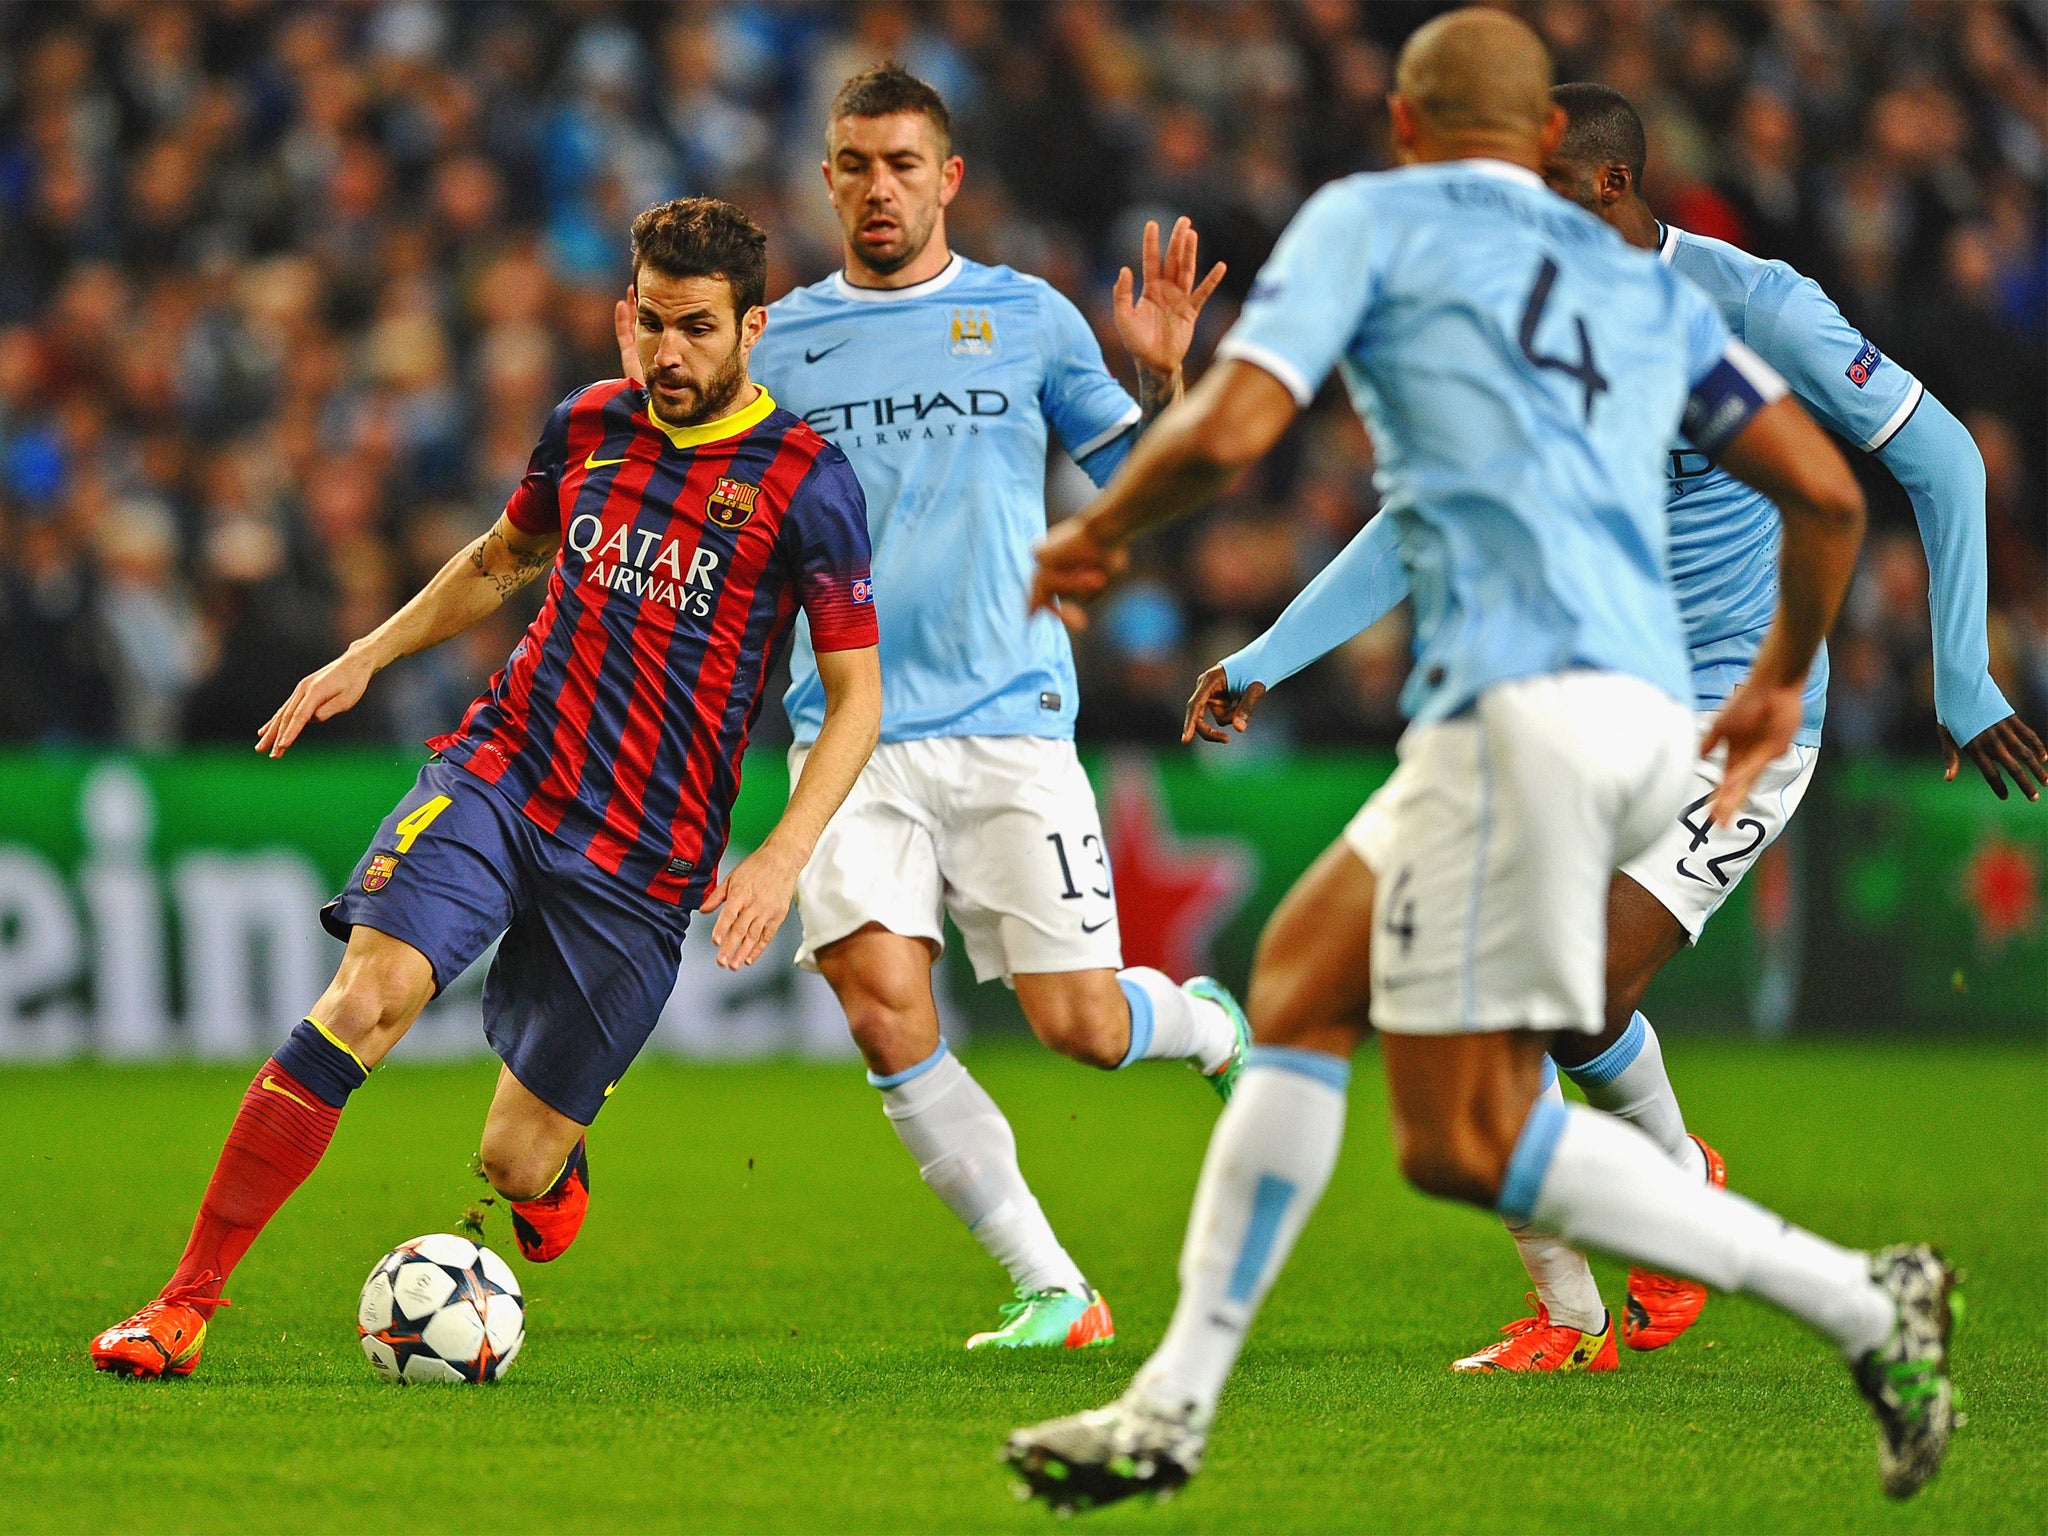 Cesc Fabregas could be a target for Manchester City, as he is classed as home-grown from his Arsenal days